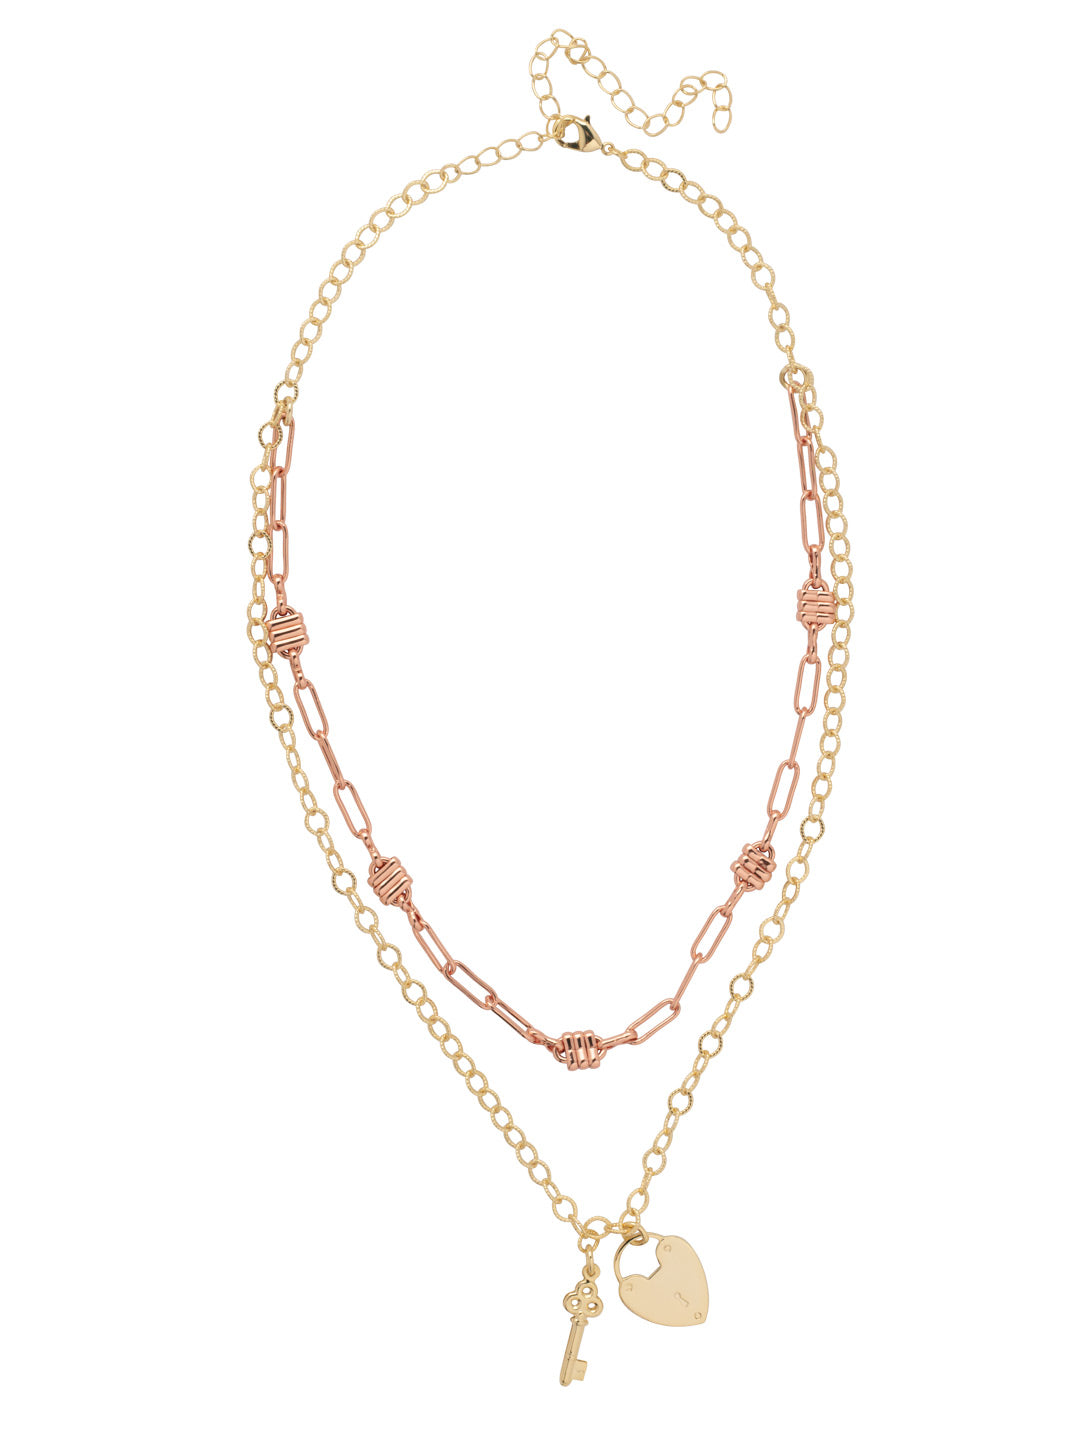 Lock and Key Layered Necklace - NFJ2MXMTL - <p>The Lock and Key Layered Necklace features a beveled edge chain and a delicate chain with a lock and key charm. From Sorrelli's Bare Metallic collection in our Mixed Metal finish.</p>